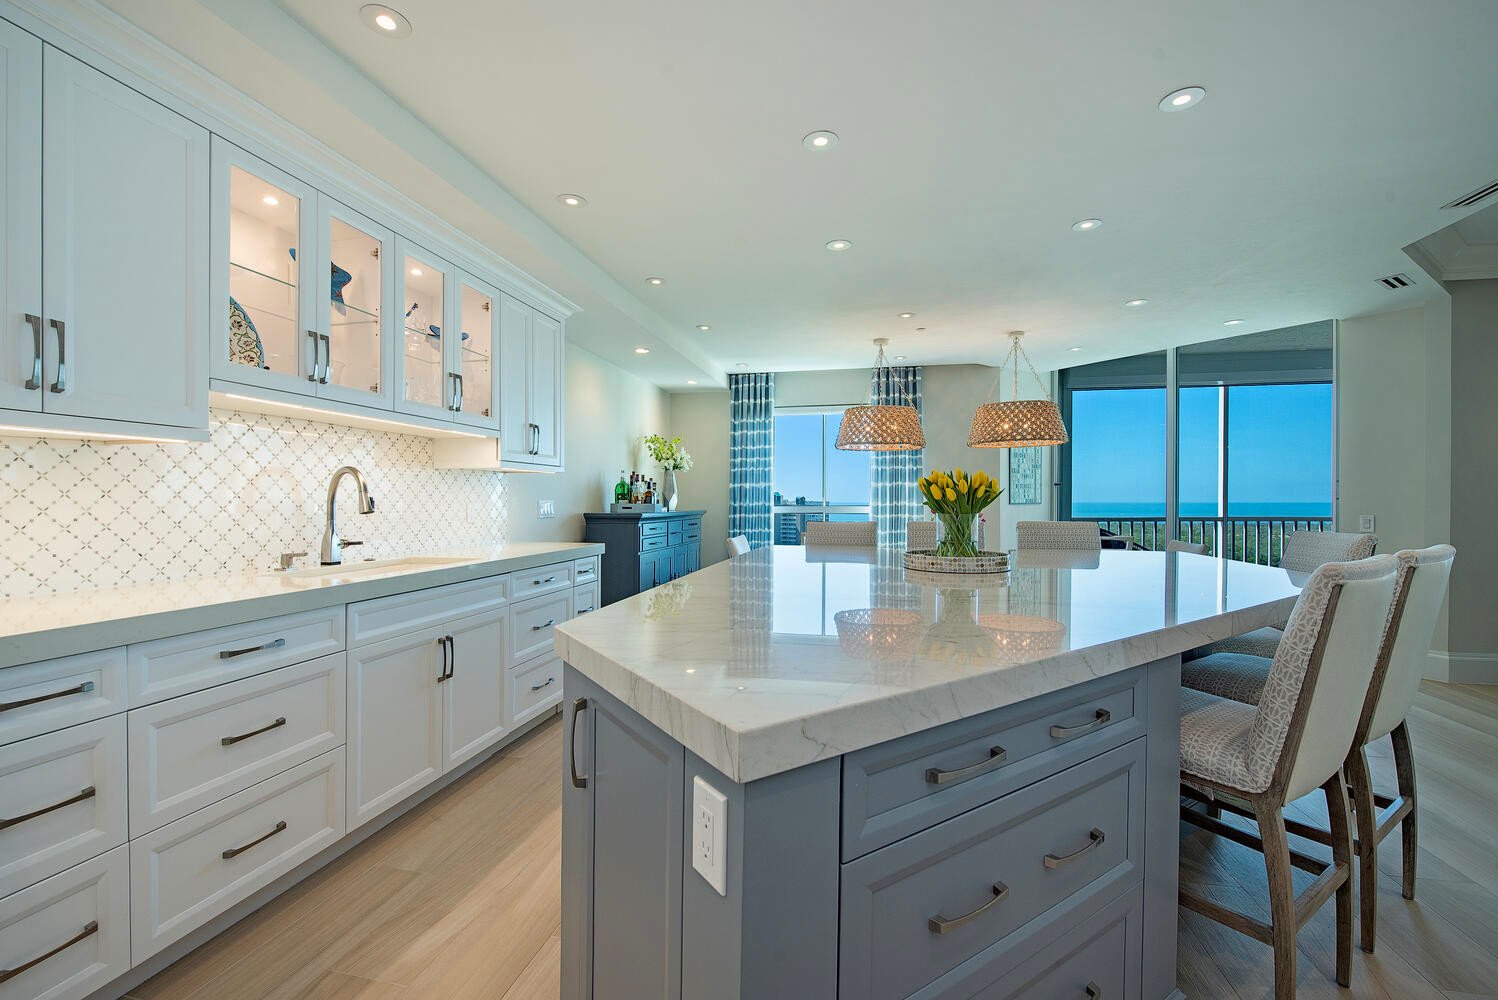 10 Best Kitchen Remodeling Ideas To Renovate Your Kitchen - Foyr